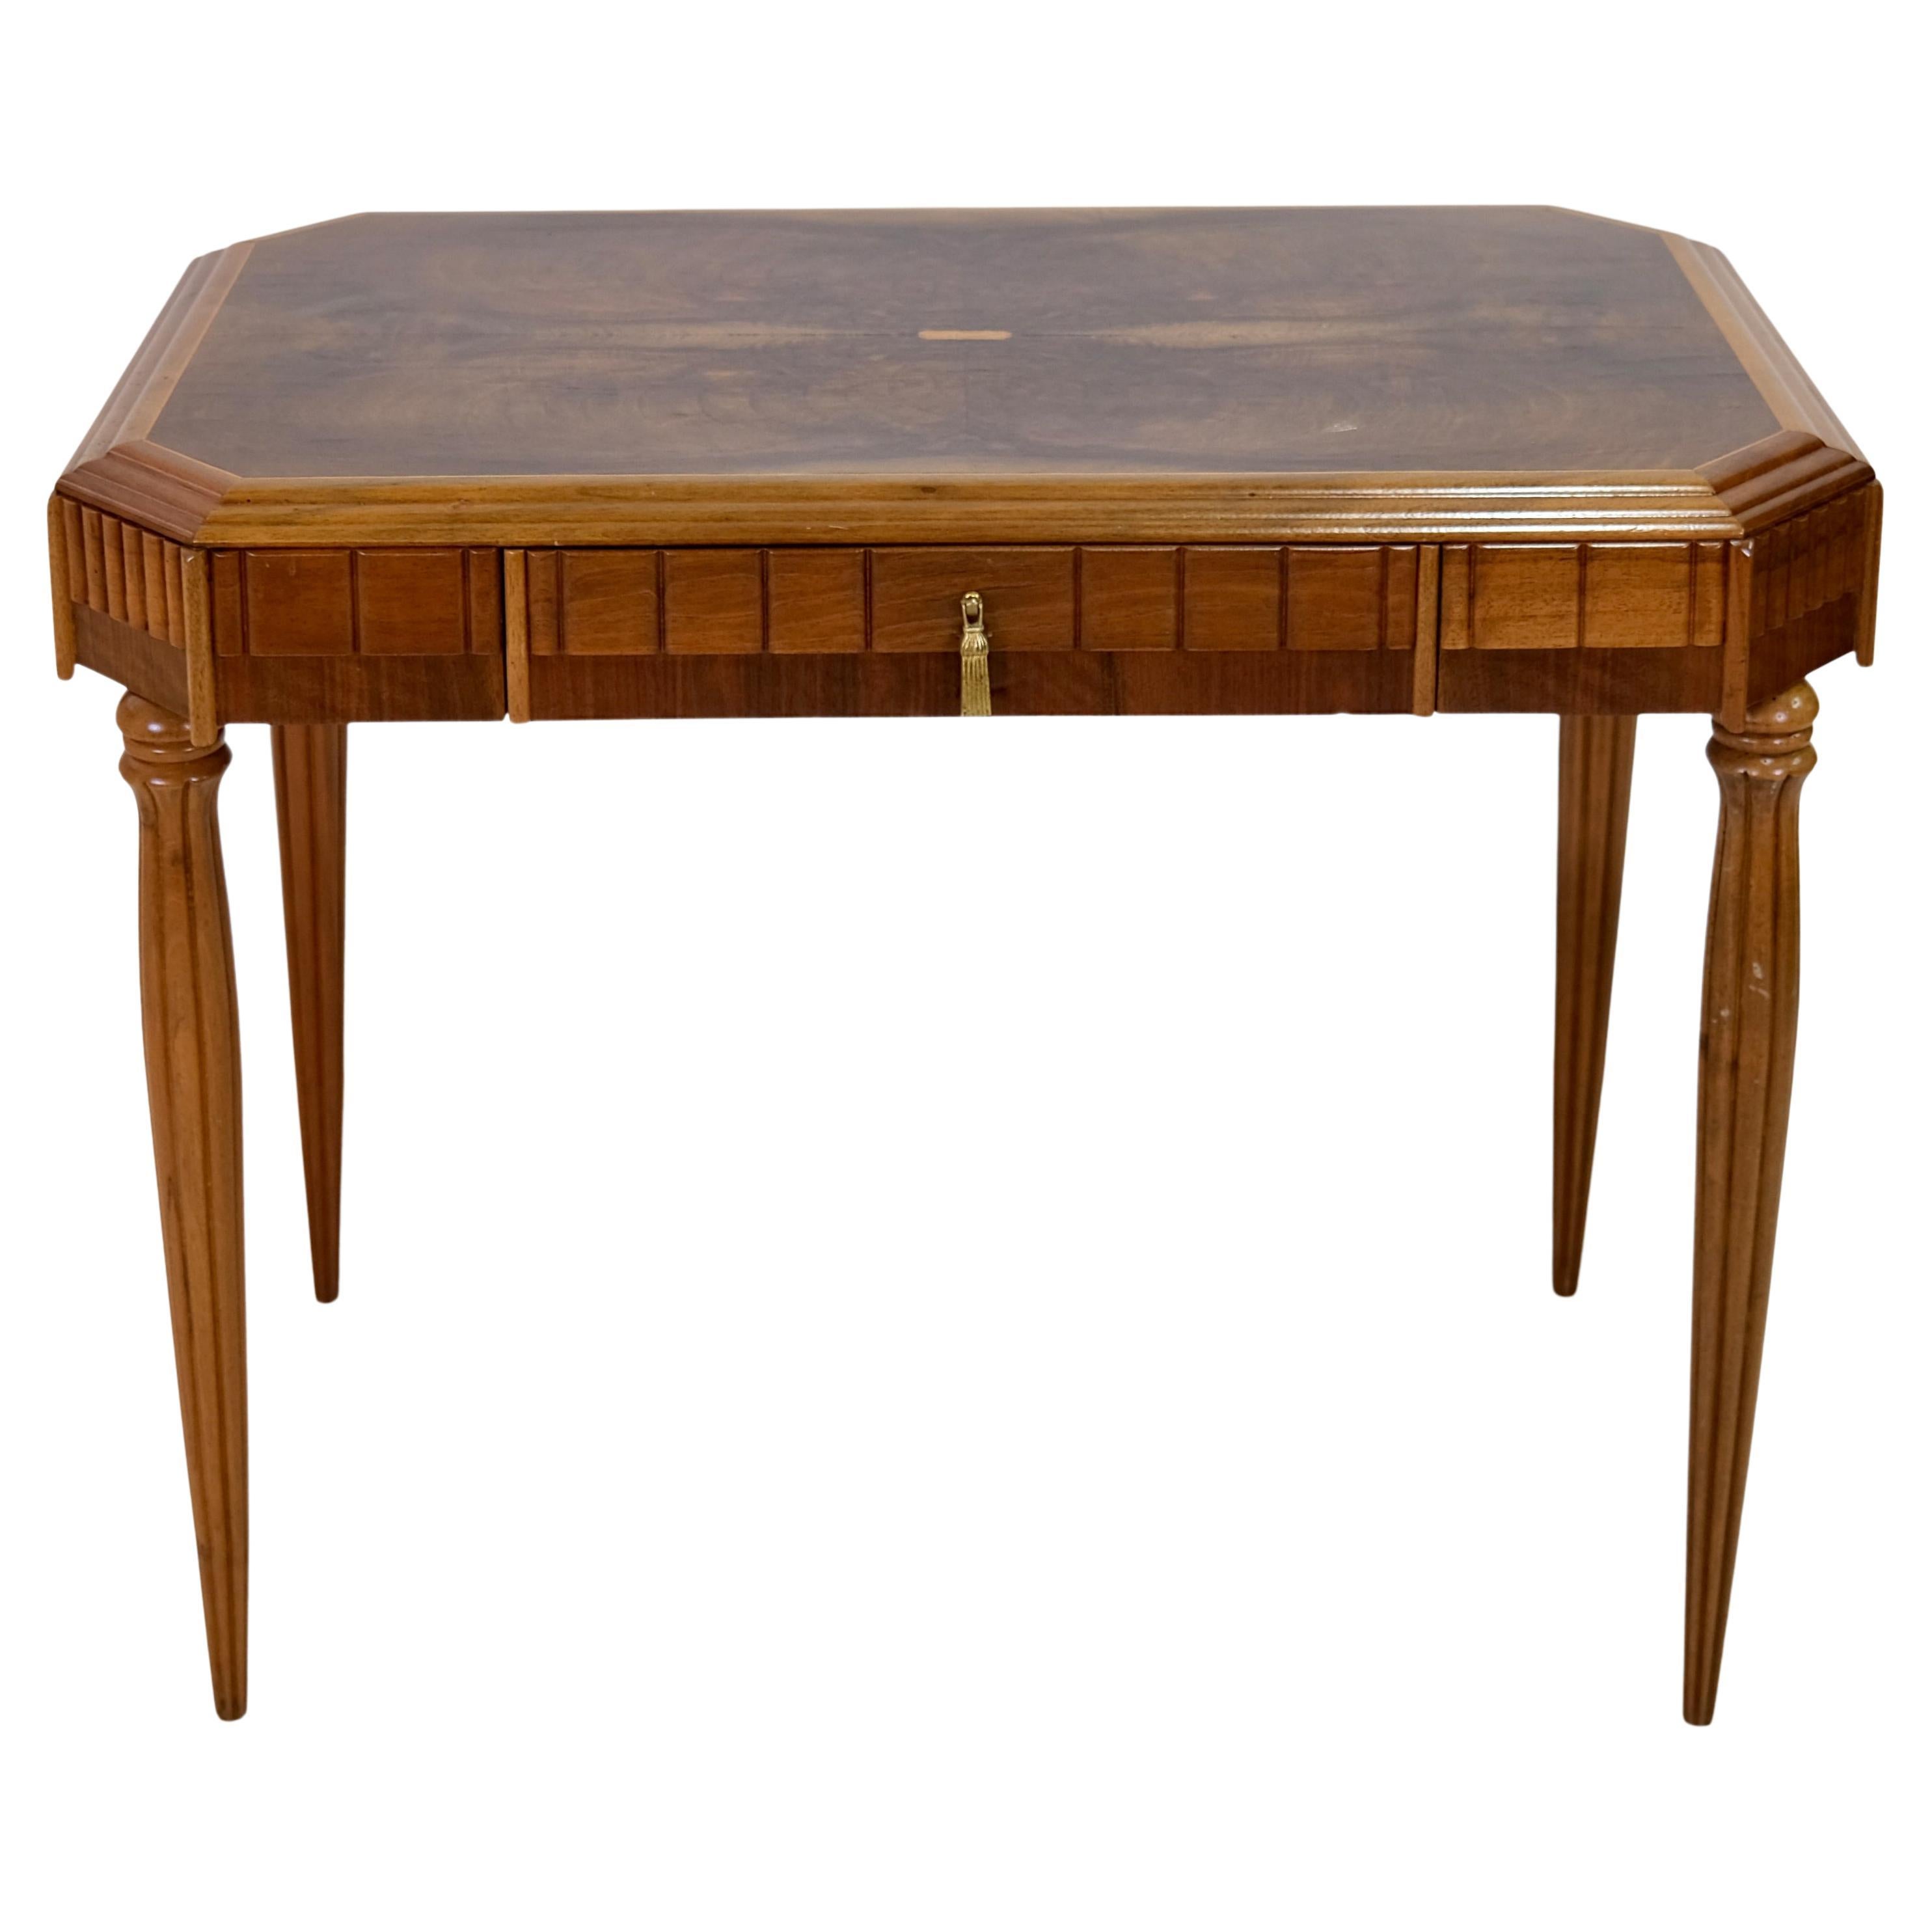 Early French Art Deco Desk in Nutwood, circa 1925